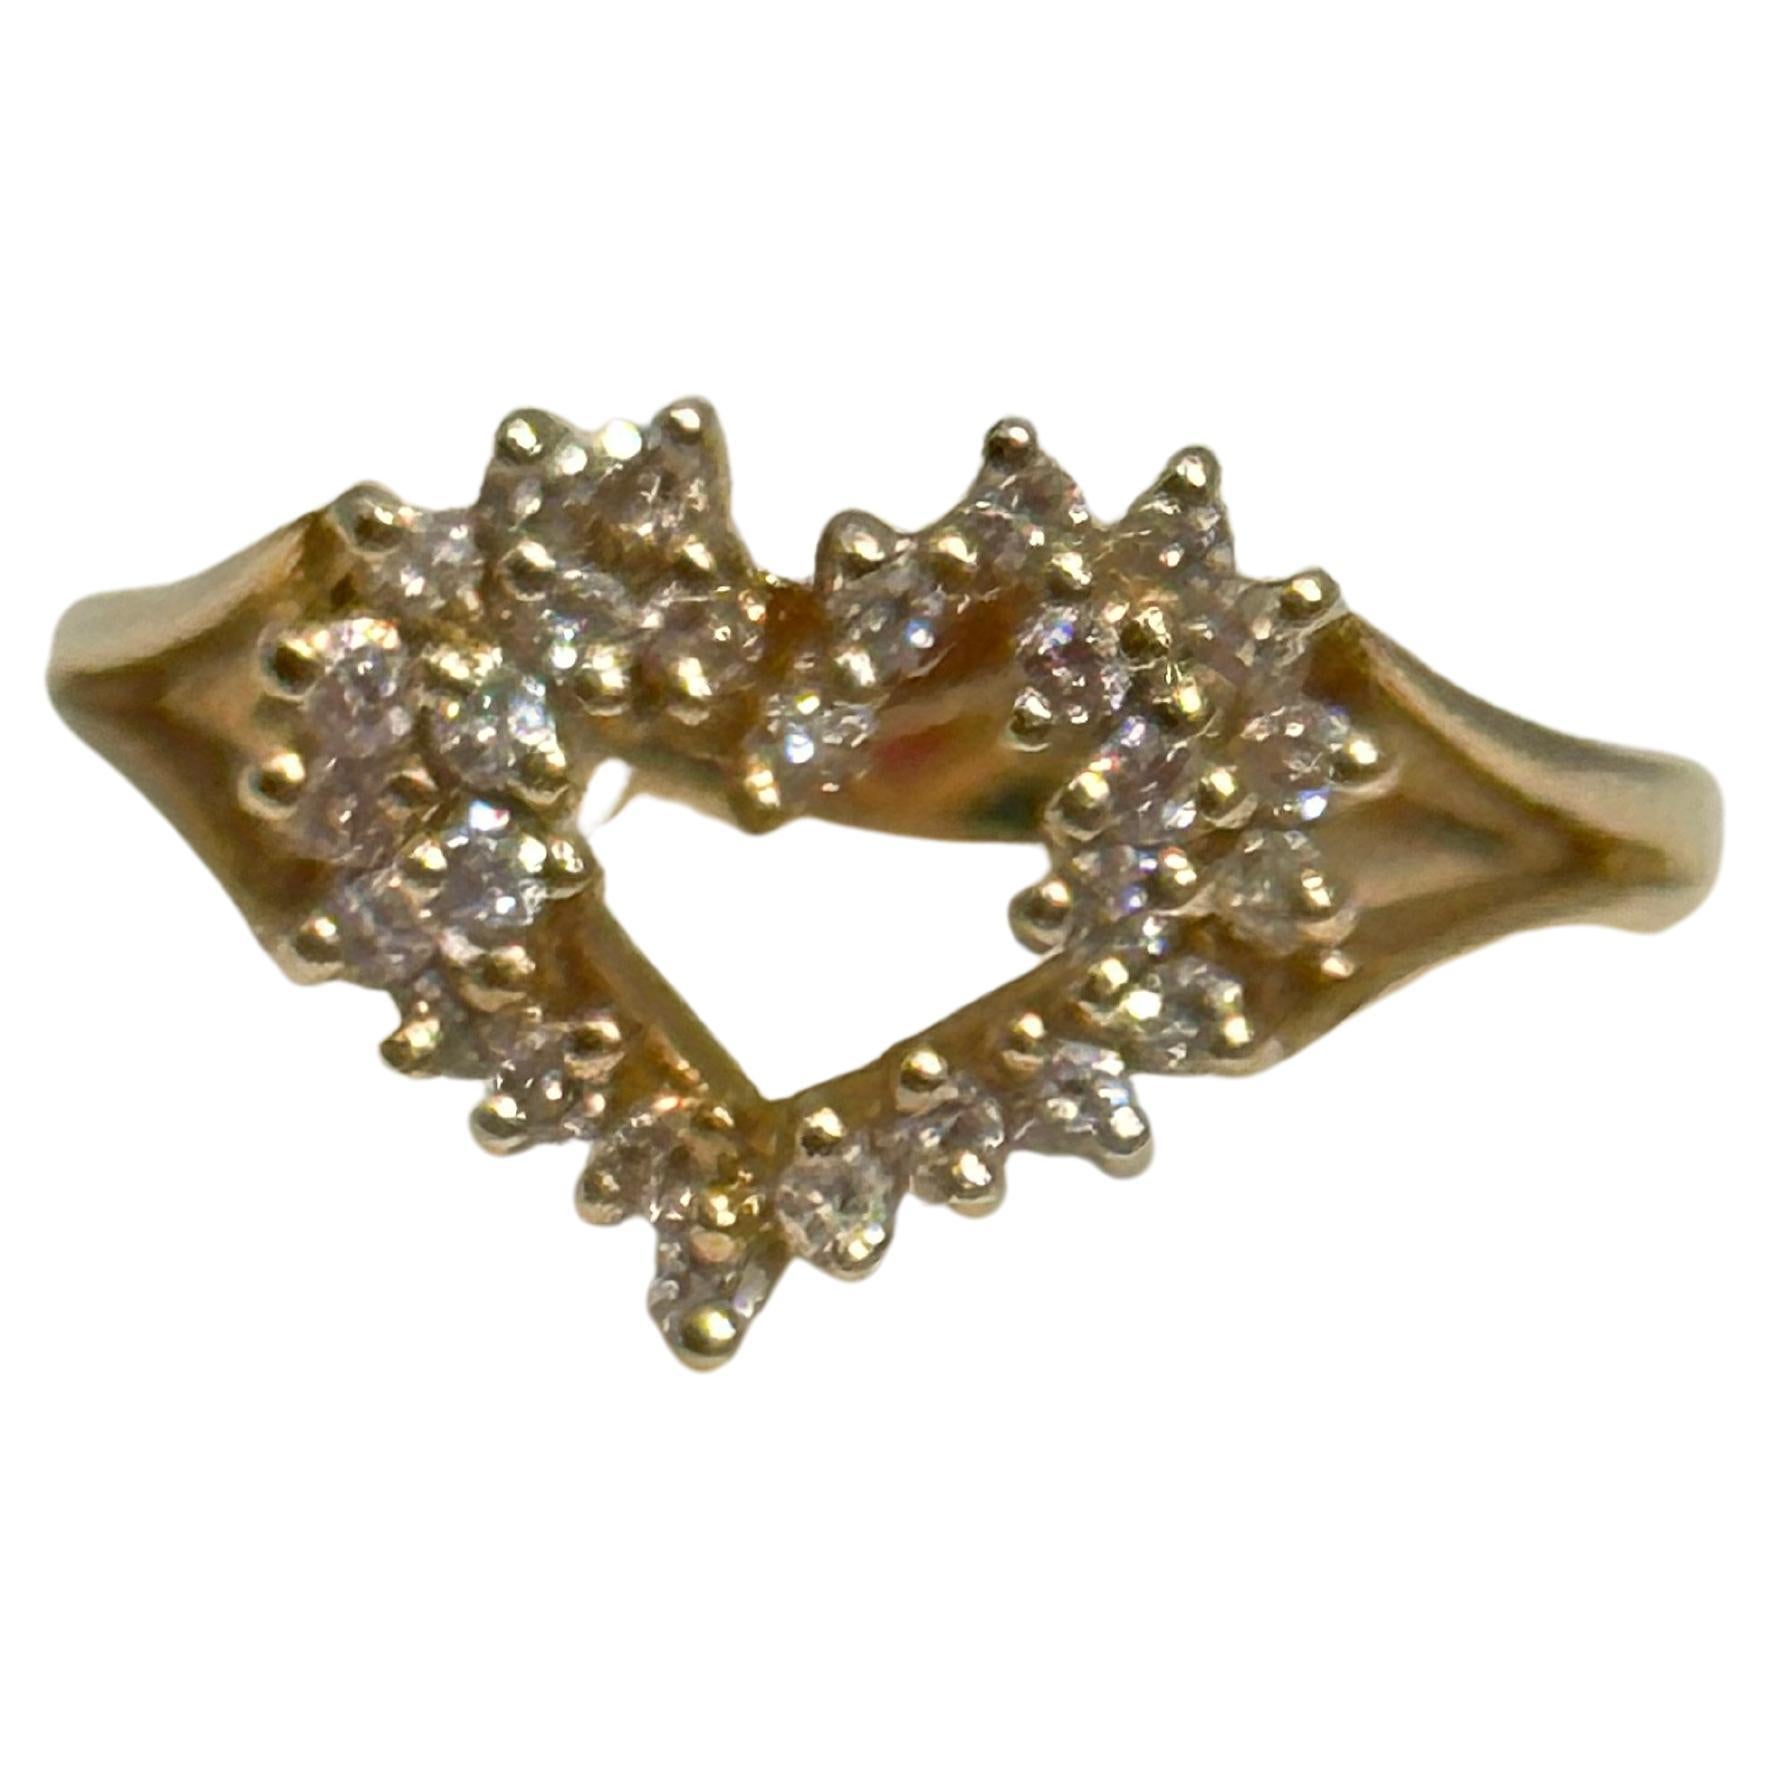 Heart Shape Gold & Diamond Cocktail 14 Karat Gold Ring Size 6
14 K gold Stamped 3.11 Grams. 
Diamond Eye clean 
There are brilliant cut Round diamonds in the ring 
Diamonds 0.5 ct approximately
Ring size is 6 but can be altered to any size.
Very